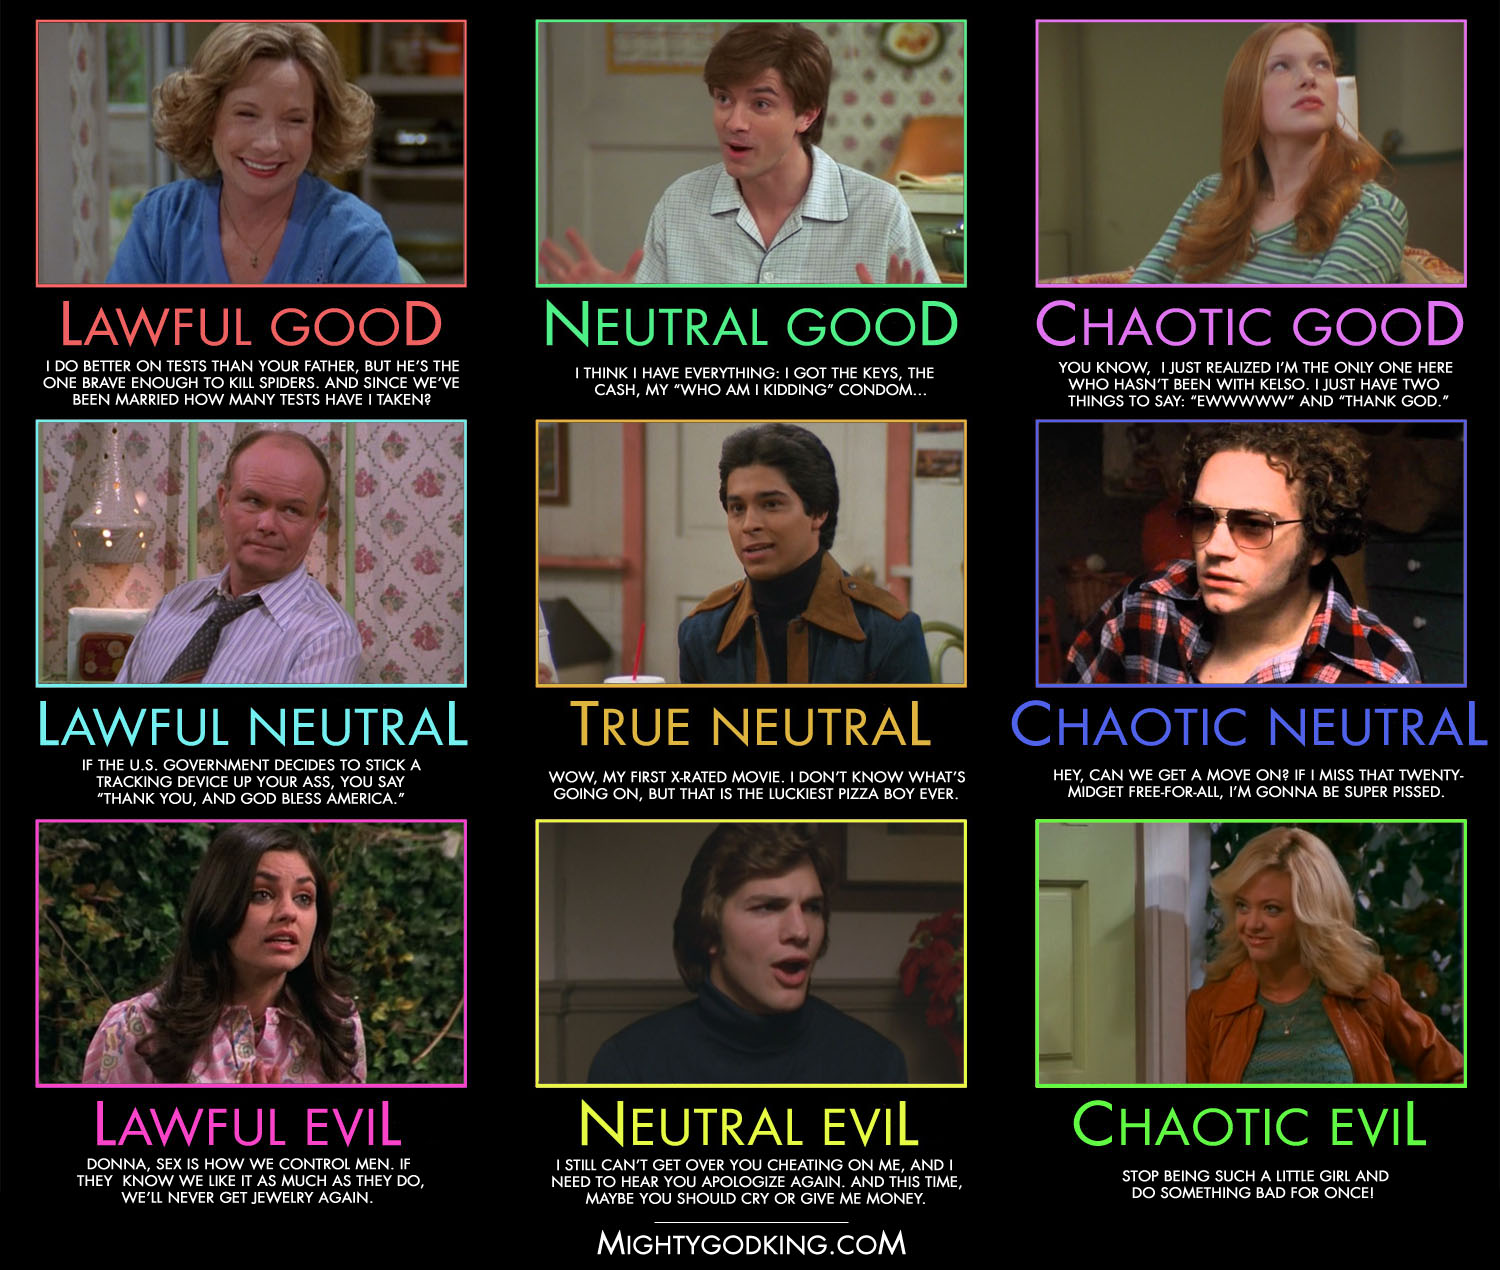 Women 70s Show Porn - Mightygodking dot com Â» Post Topic Â» ALIGNMENT CHART! That ...